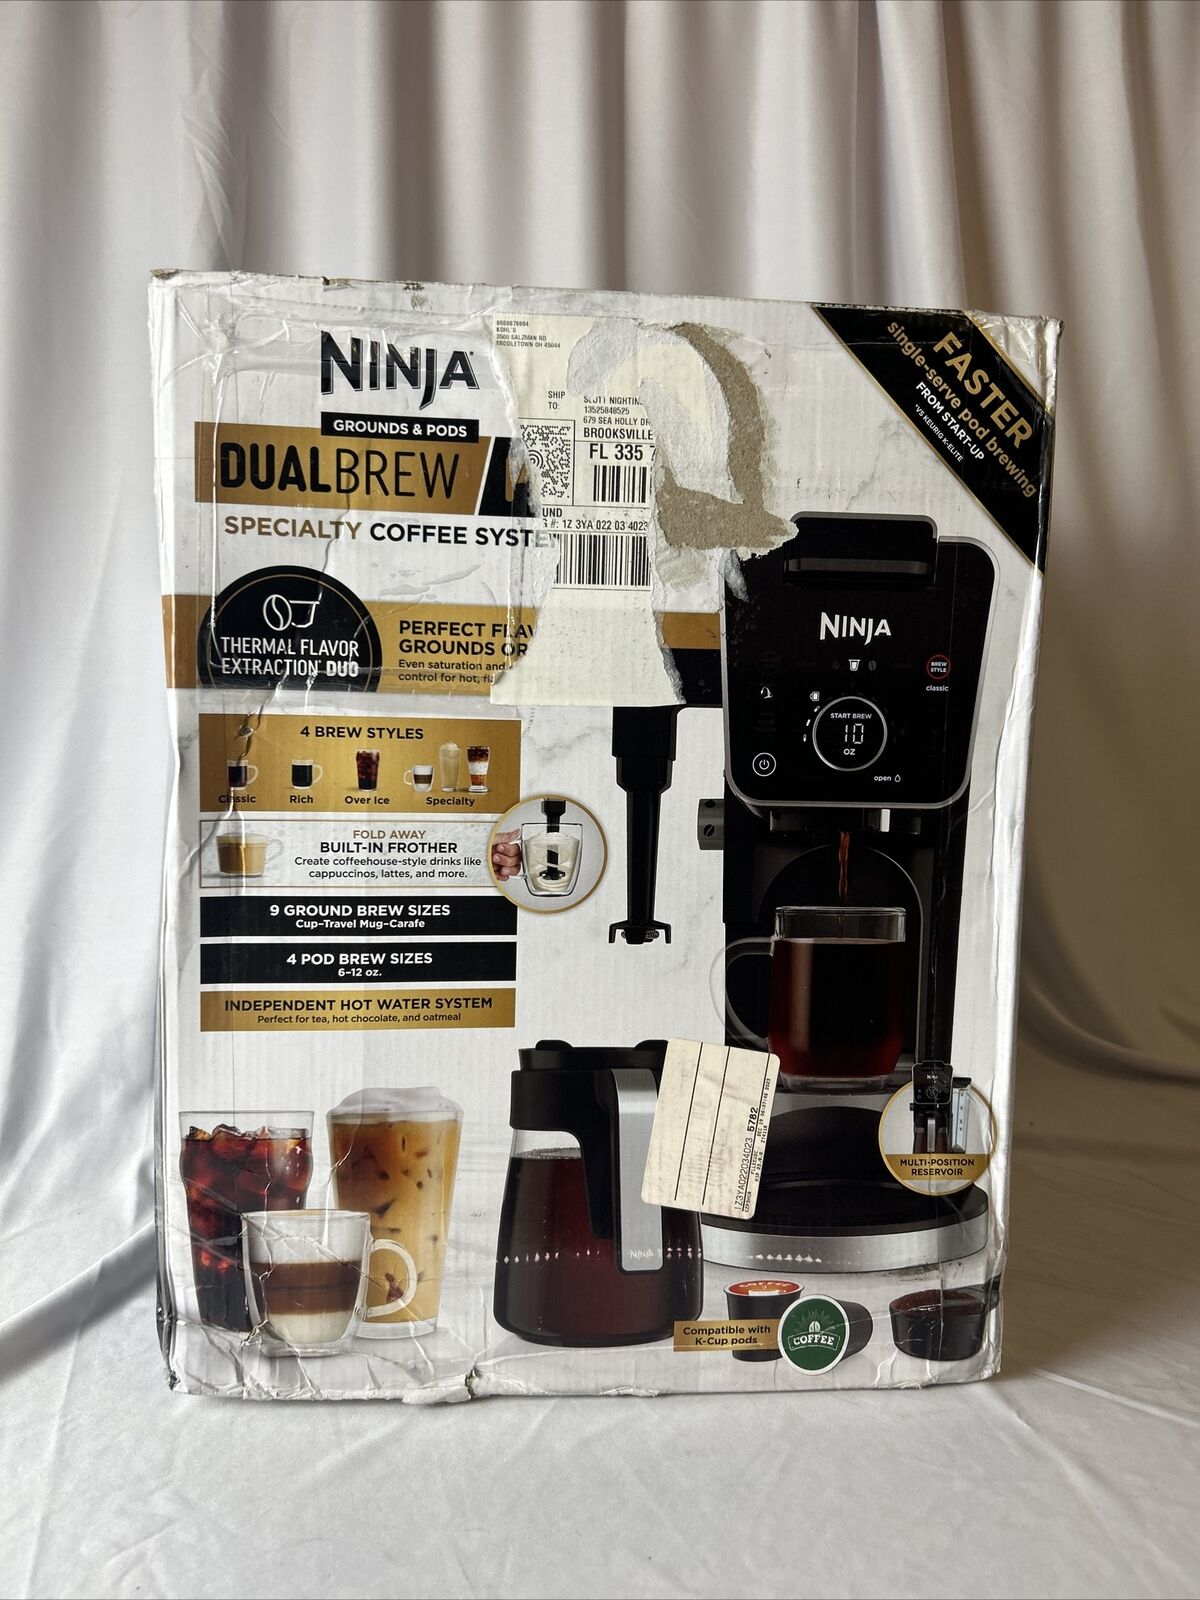 NINJA CFP300 DUALBREW 12 CUP SPECIALTY COFFEE SYSTEM